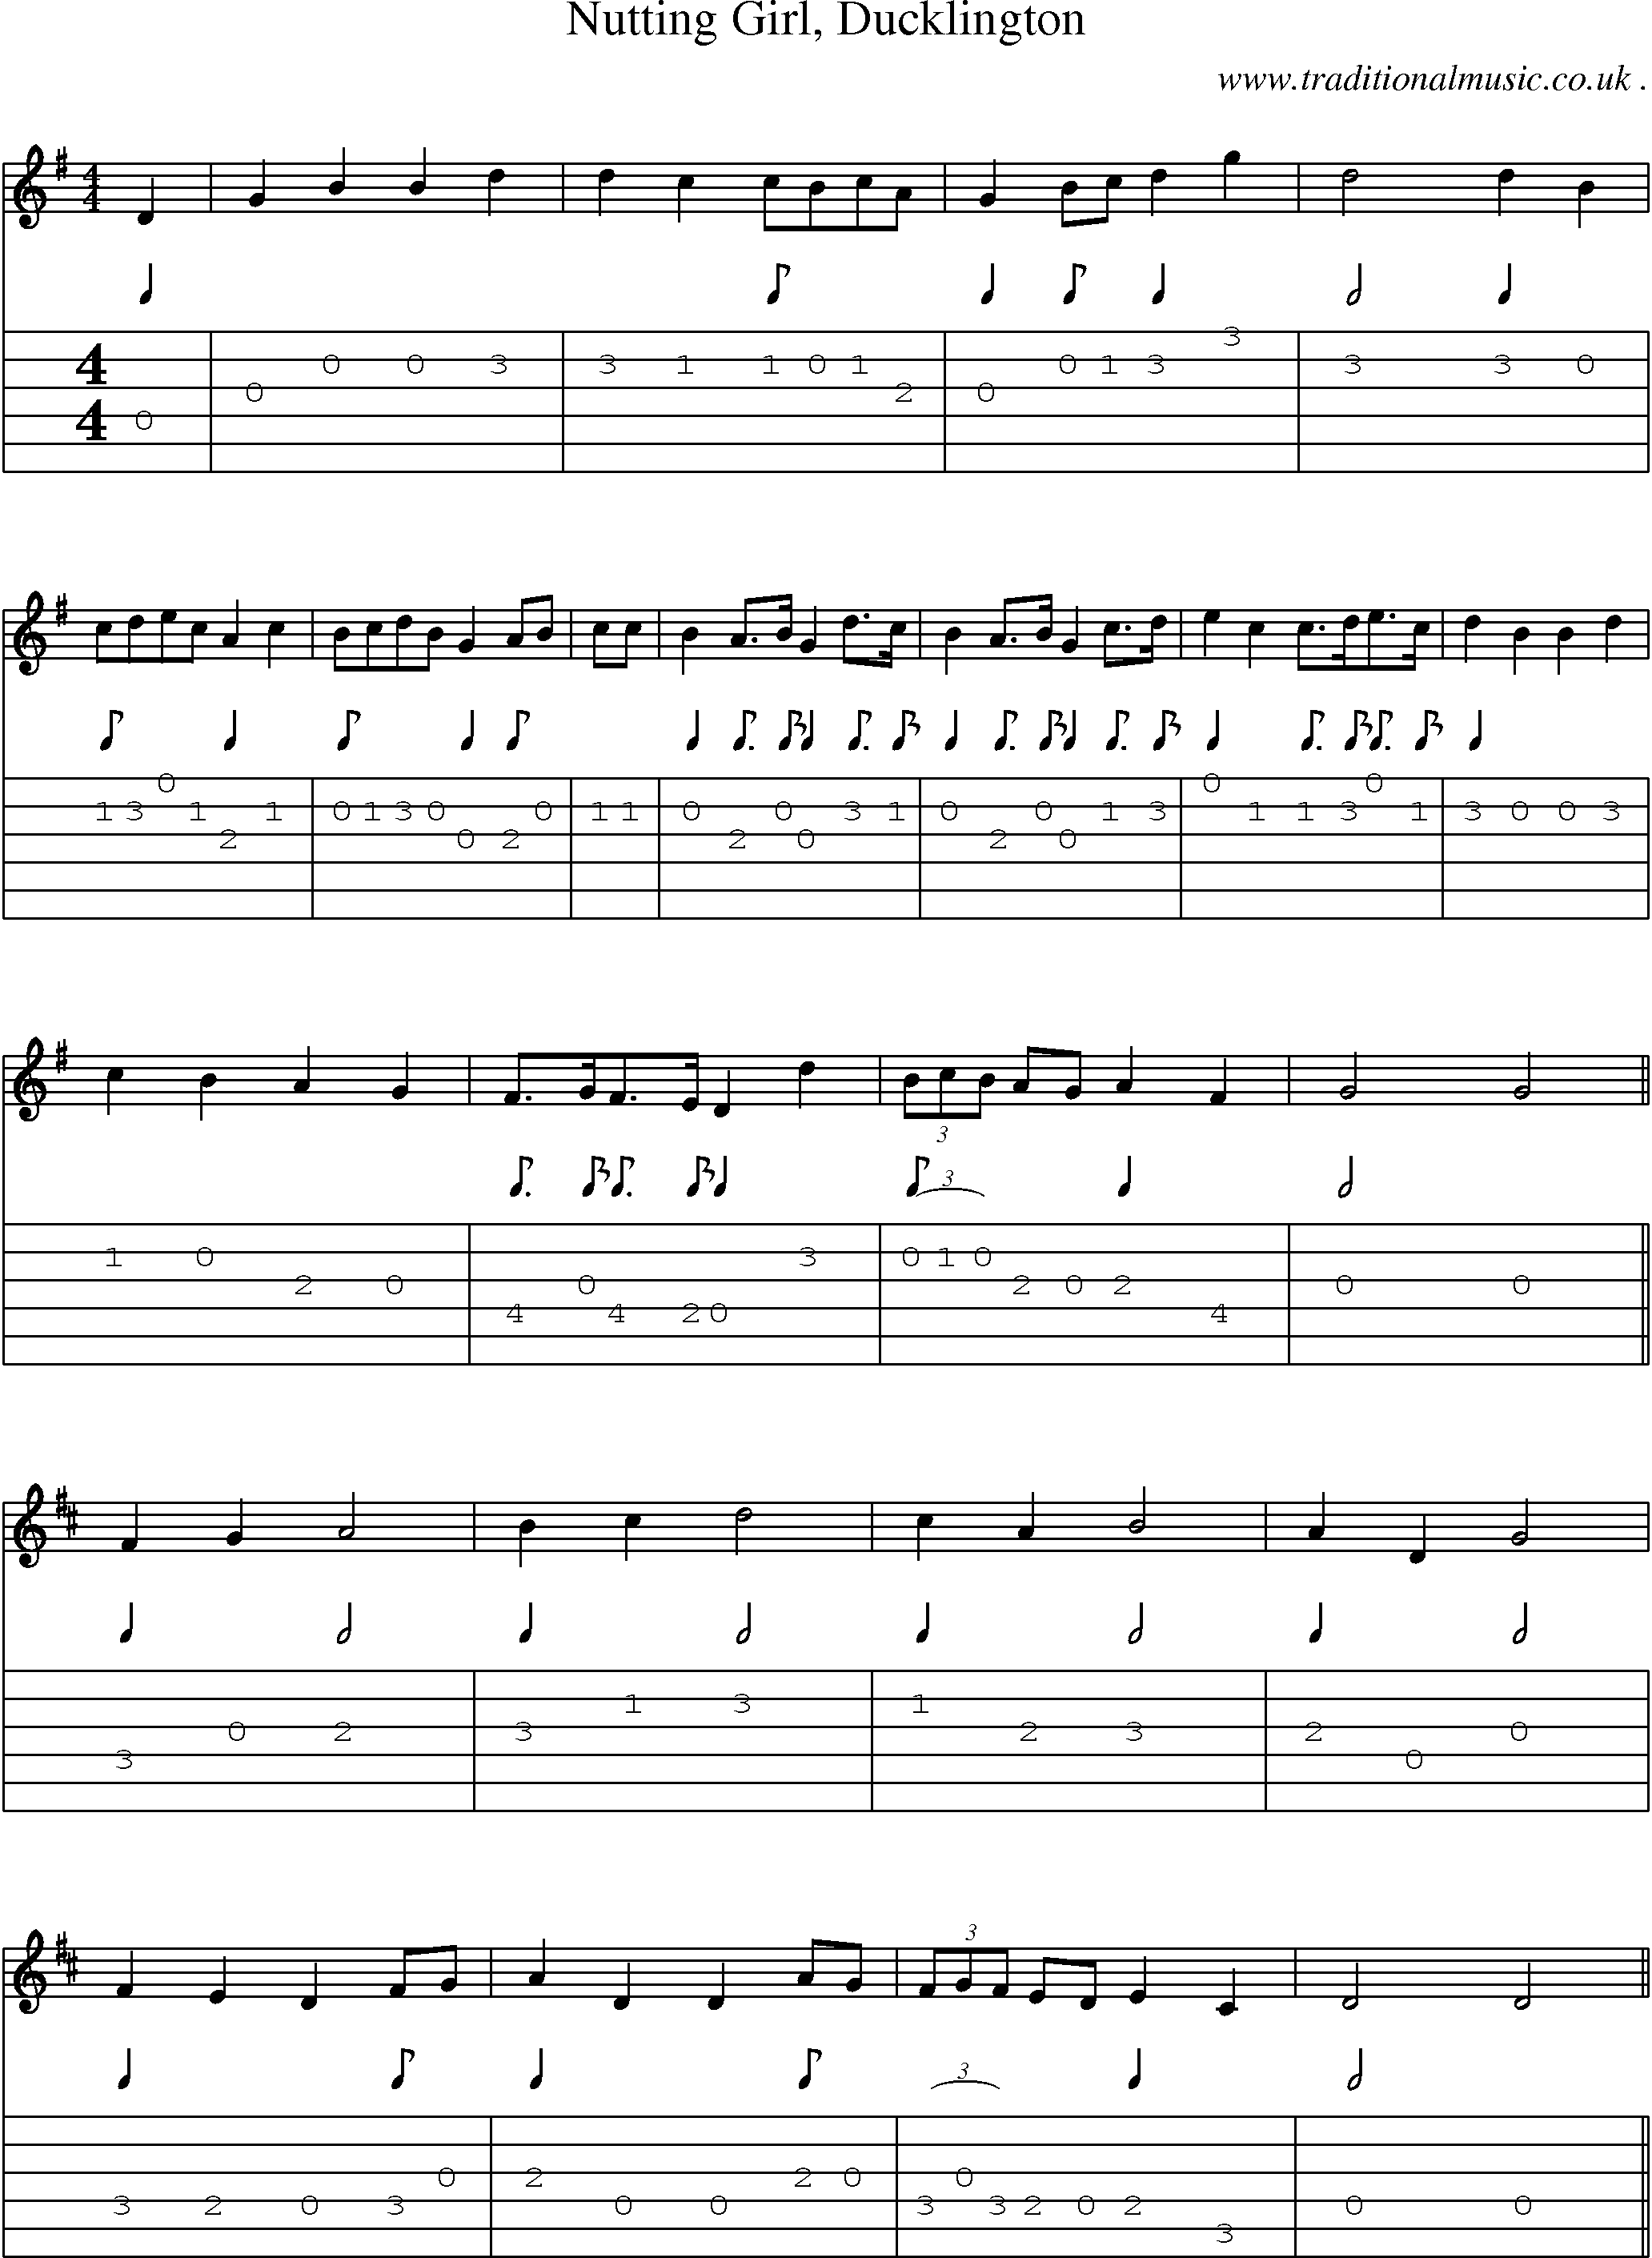 Sheet-Music and Guitar Tabs for Nutting Girl Ducklington